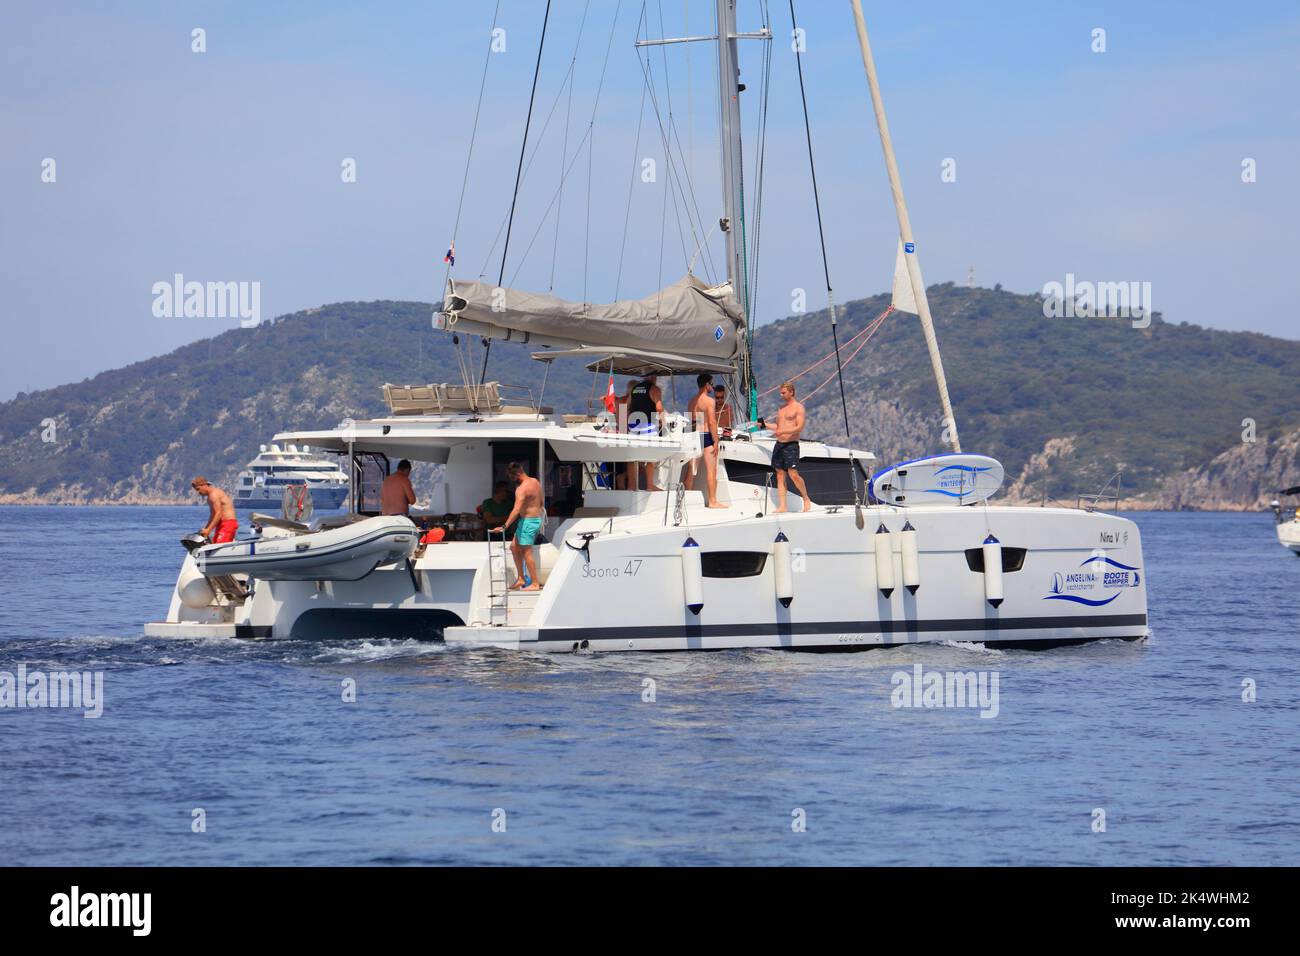 HVAR, CROATIA - JUNE 16, 2021: People sail on Fountaine Pajot Saona 47 yacht in Adriatic Sea. Fountaine-Pajot is a French pleasure boat manufacturing Stock Photo